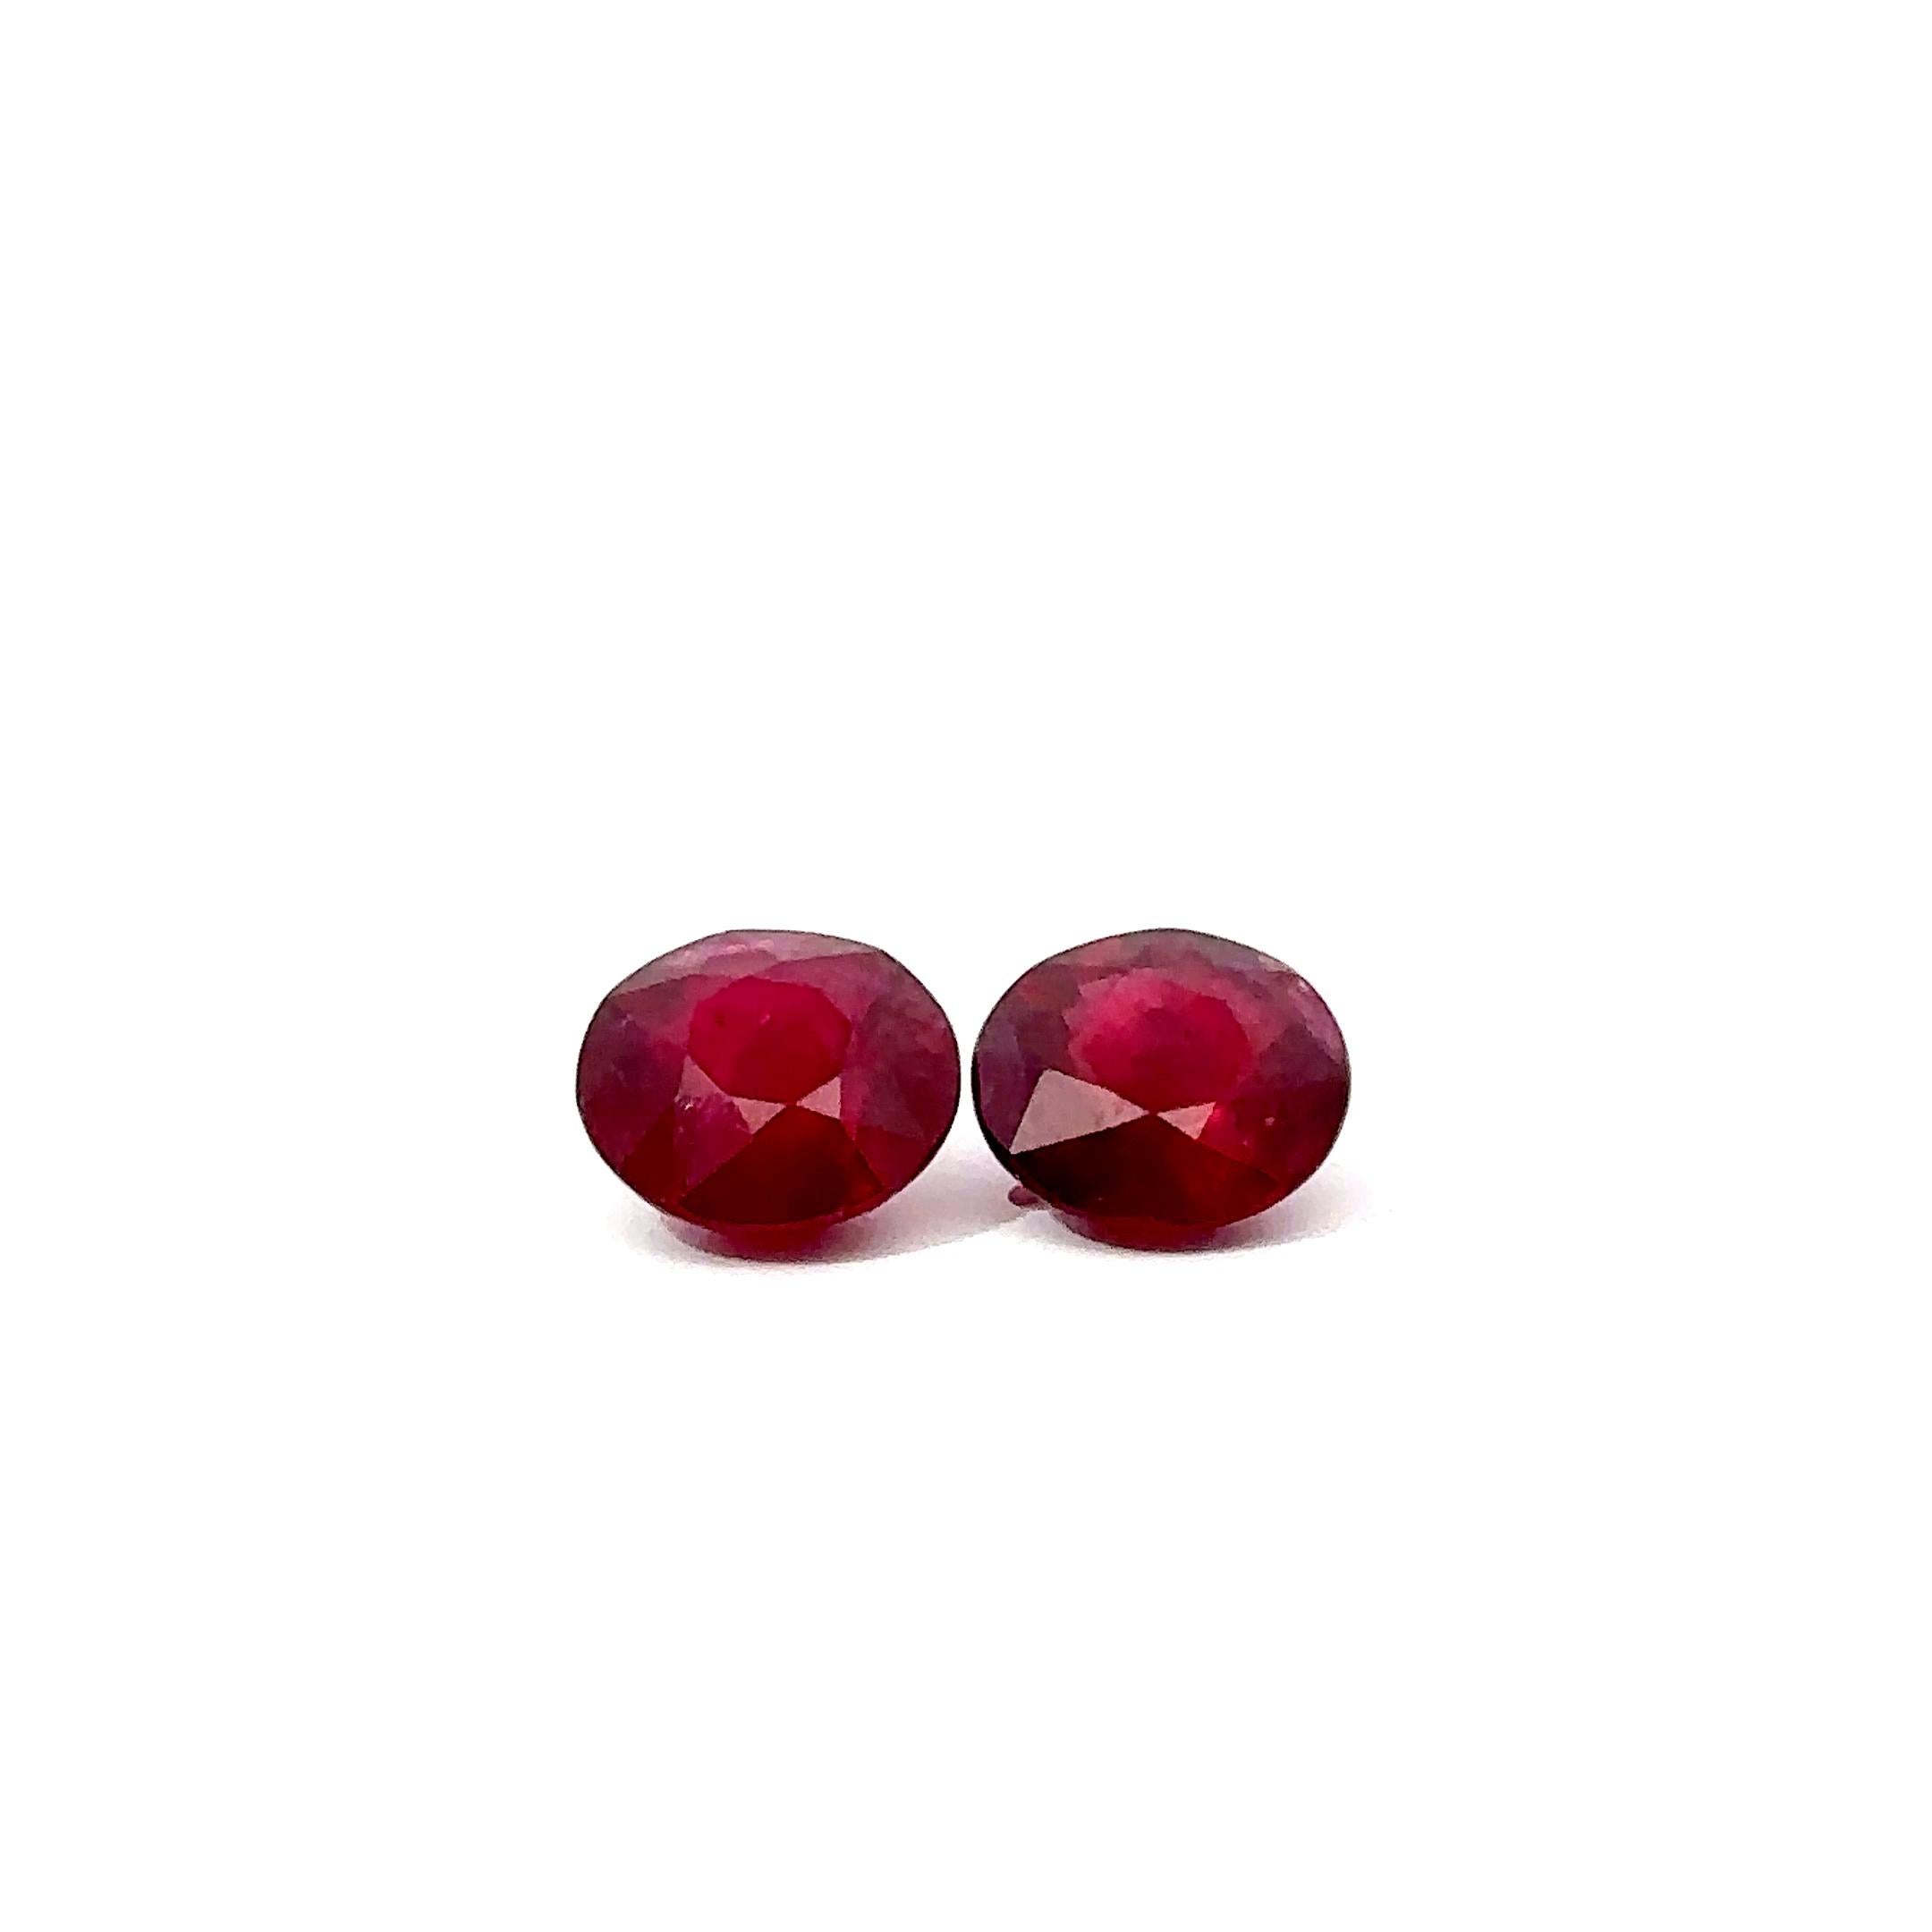 CDC Certified 5.25 Carat Ruby - Round ( Pair ) Heated ( Madagascar )  For Sale 1